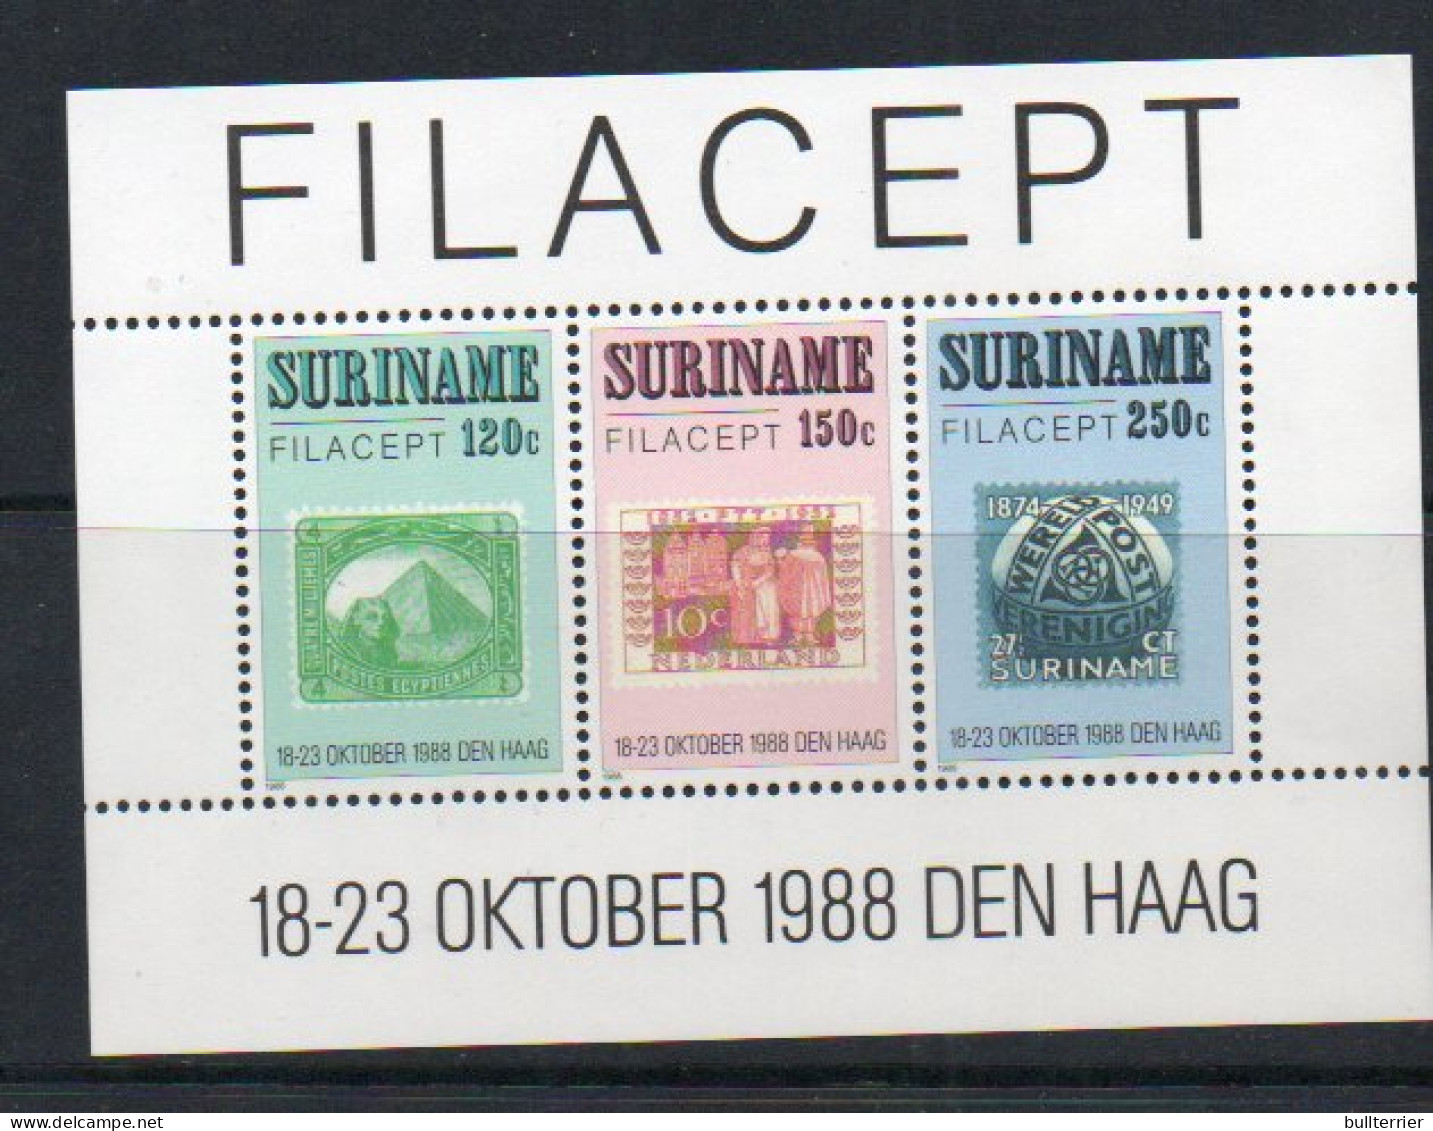 STAMPS ON STAMPS - SURINAM - 1988- FILACEPT SOUVENIR   MINT NEVER HINGED, SG CAT £18 - Stamps On Stamps